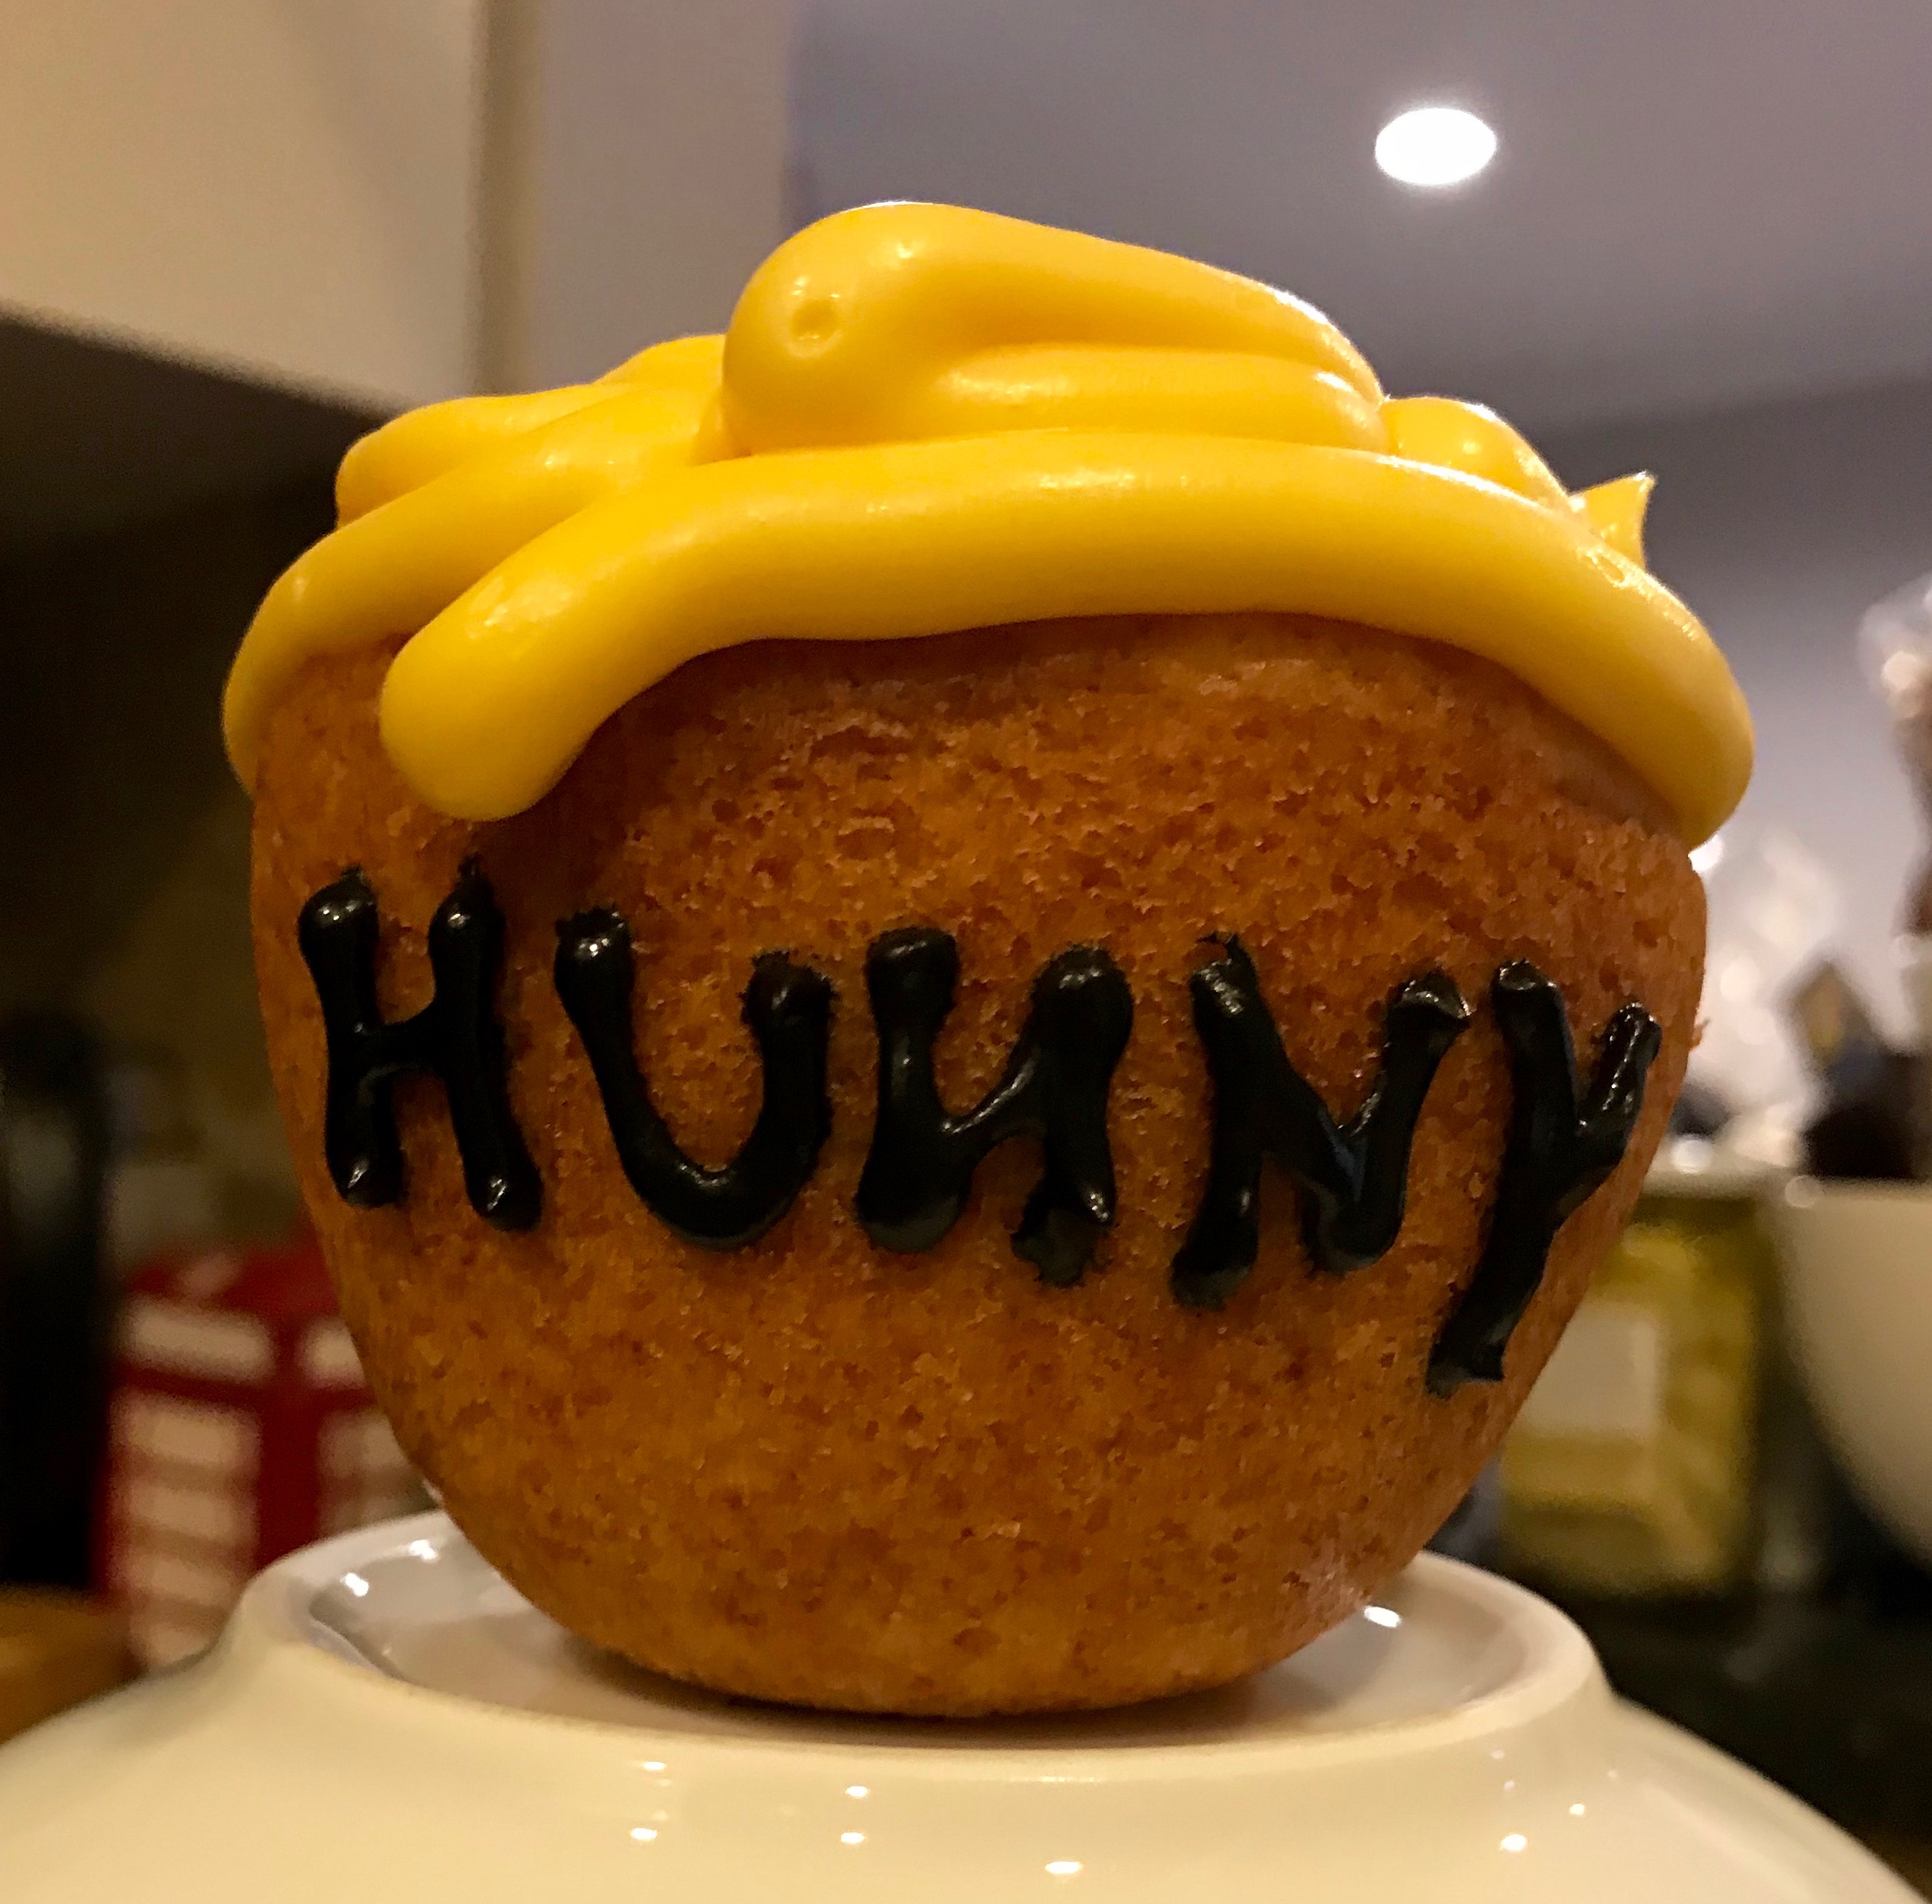 DIY: Winnie-the-Pooh Inspired HUNNY Pot Cupcakes – Mouse Ears Mom